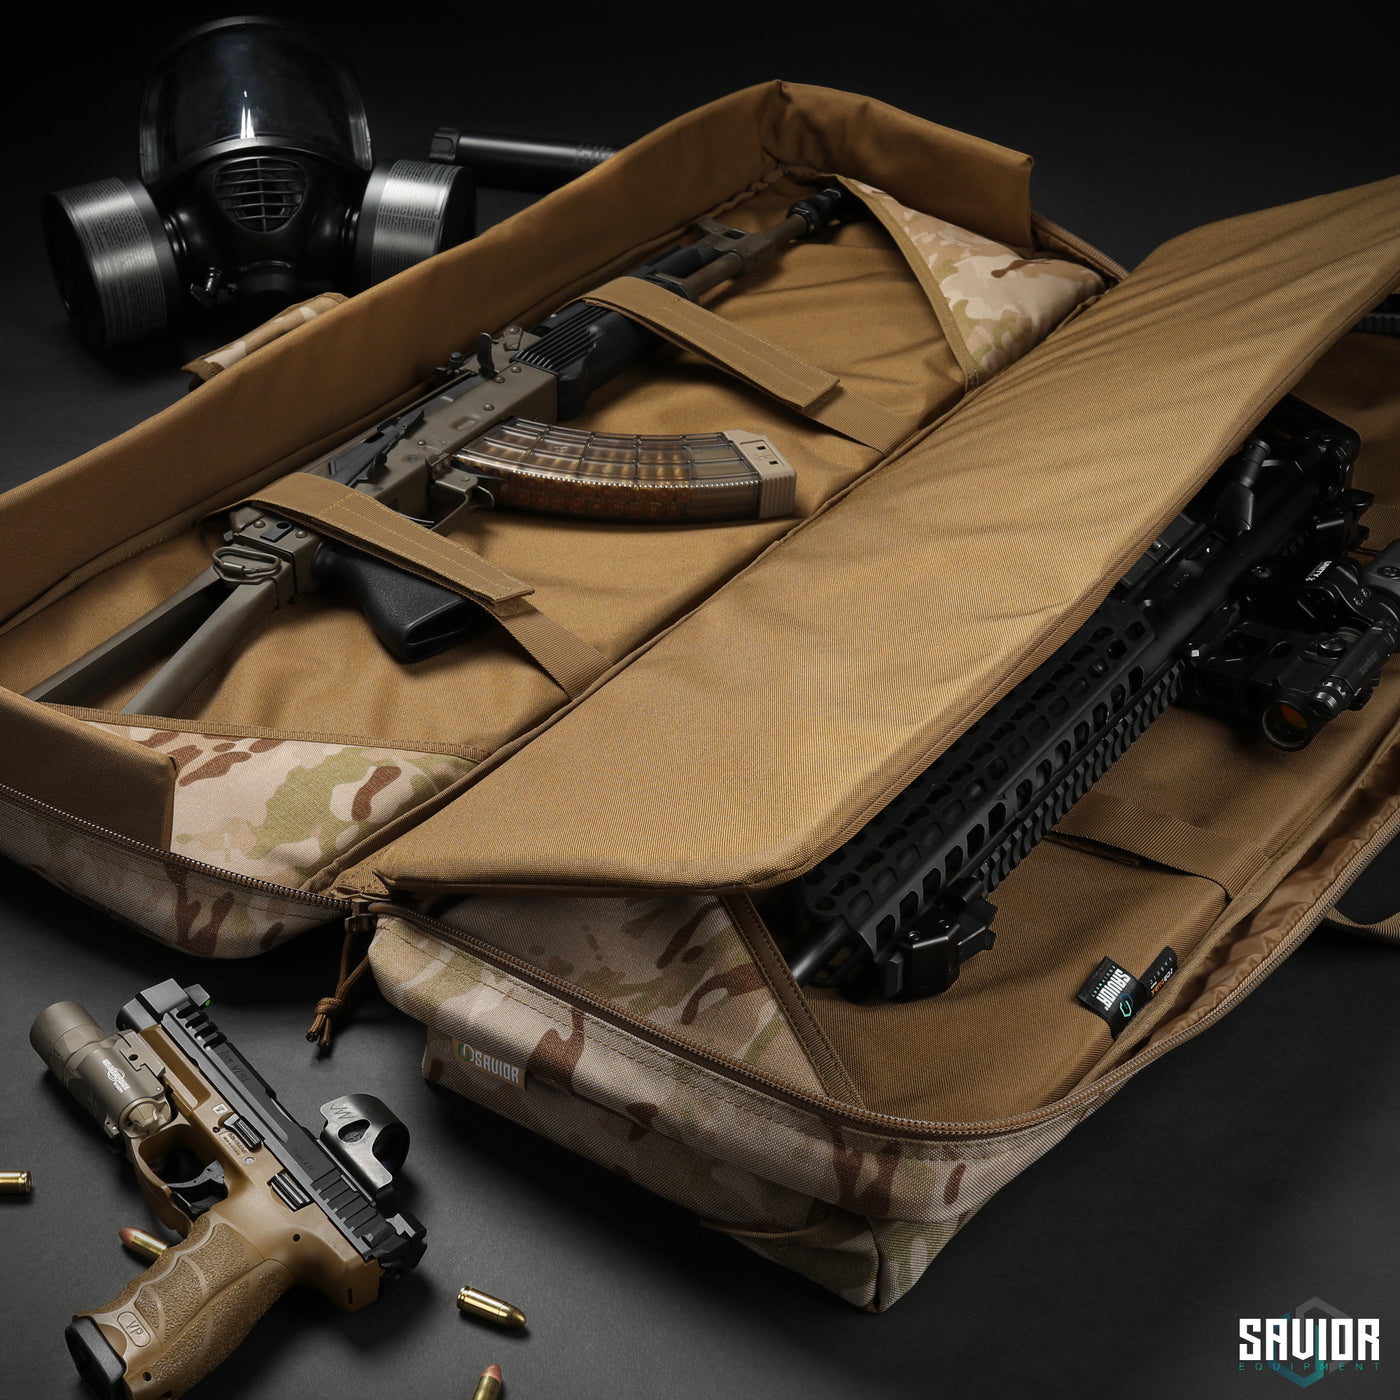 Double Rifle Slots - 1000D Multicam fabric interior. Extra padding for all-around protection. Straps to lockdown your firearms during transportation. Firearms shown not included.